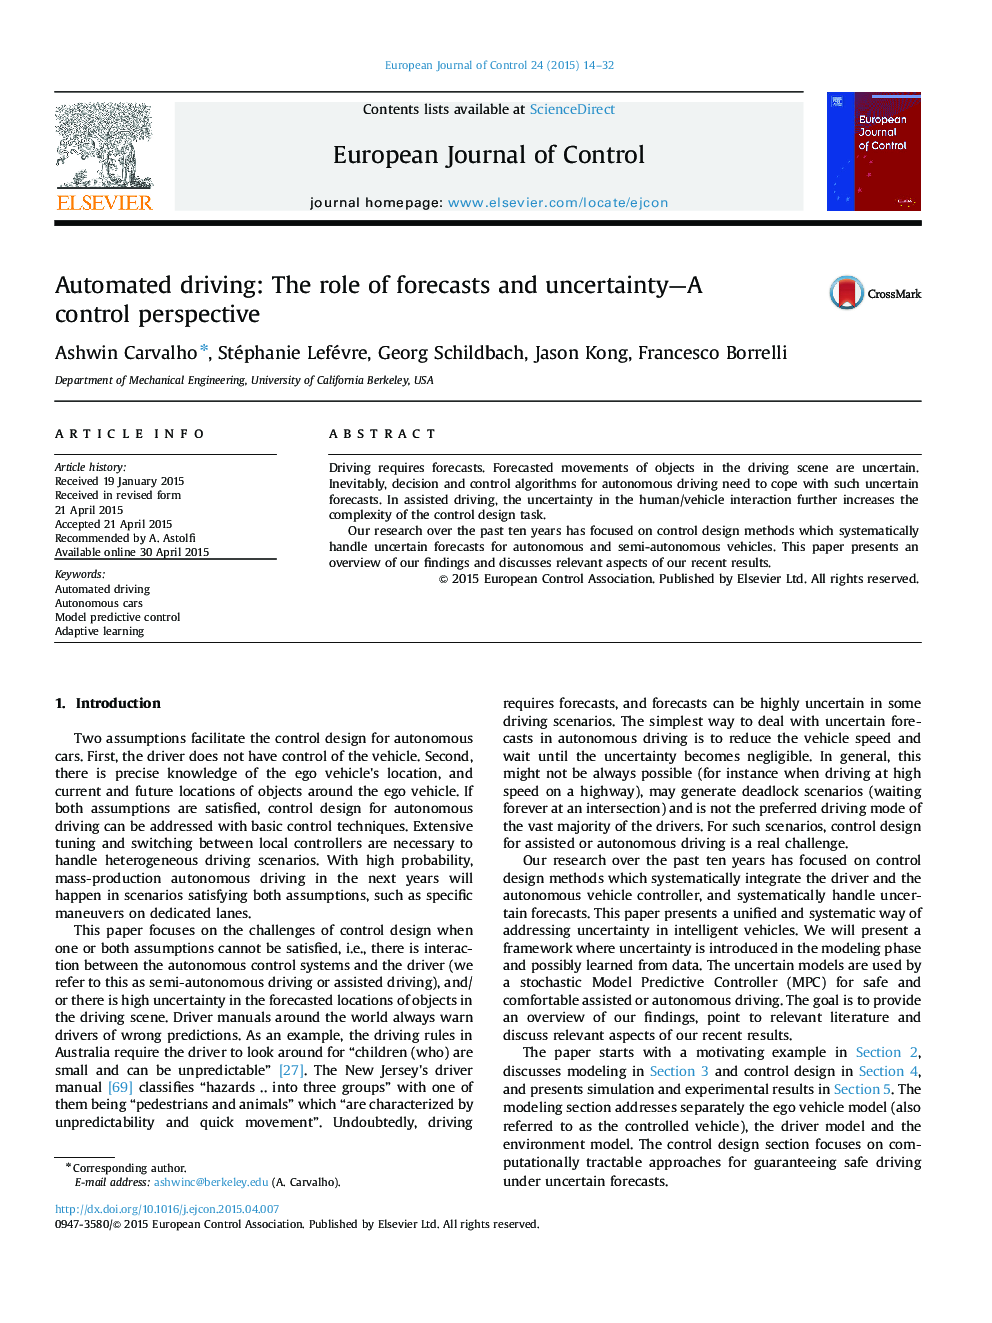 Automated driving: The role of forecasts and uncertainty—A control perspective